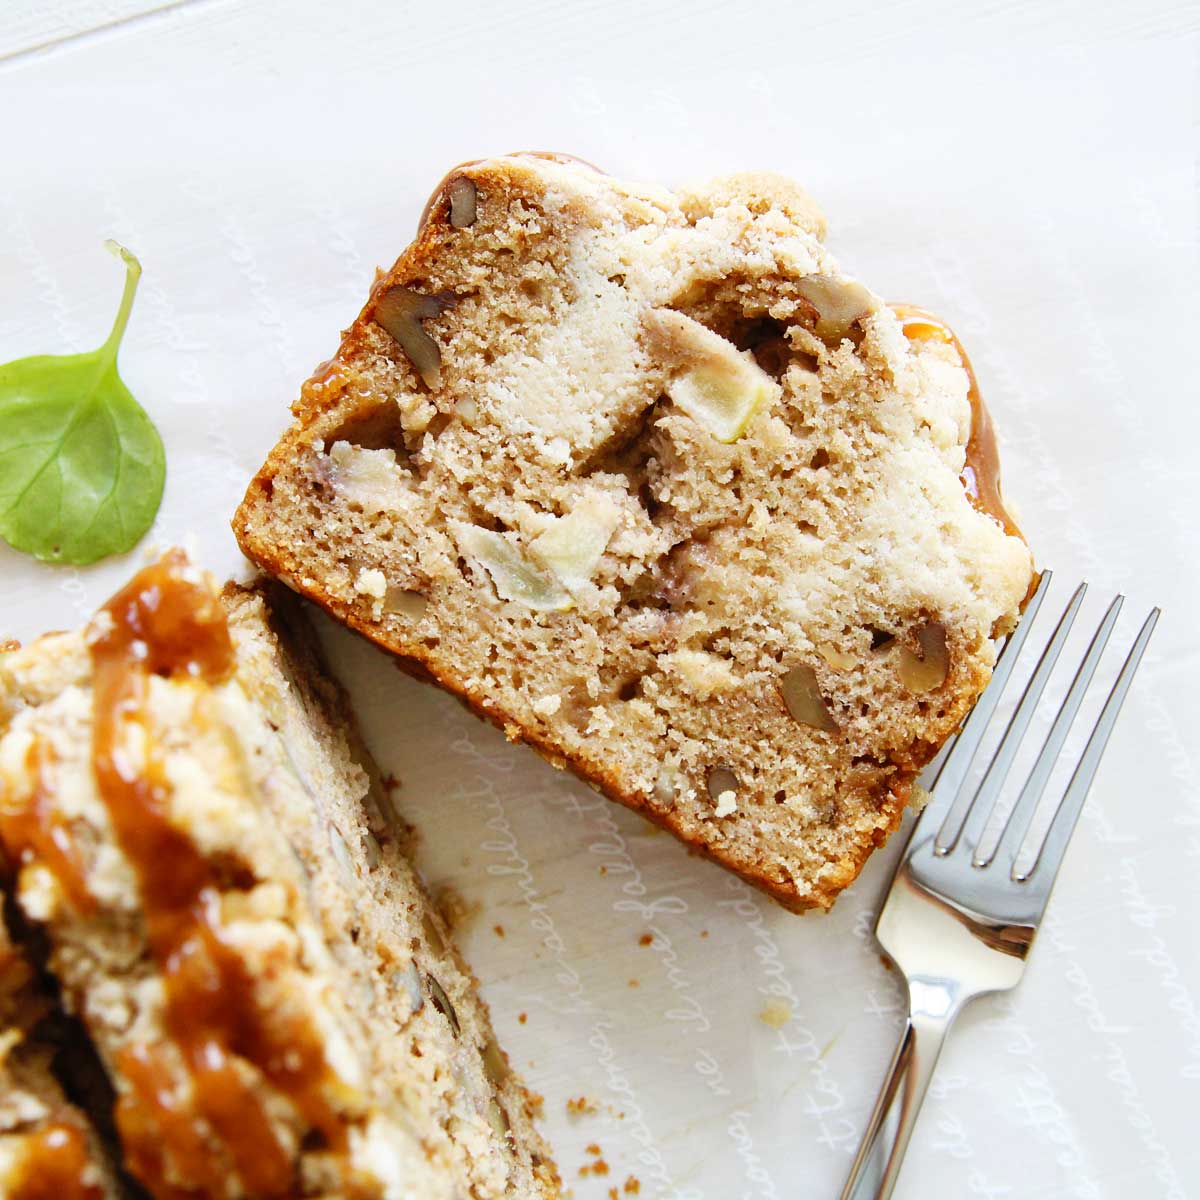 The Most Comforting Applesauce Banana Bread with Streusel Topping - Brown Sugar Whipped Cream